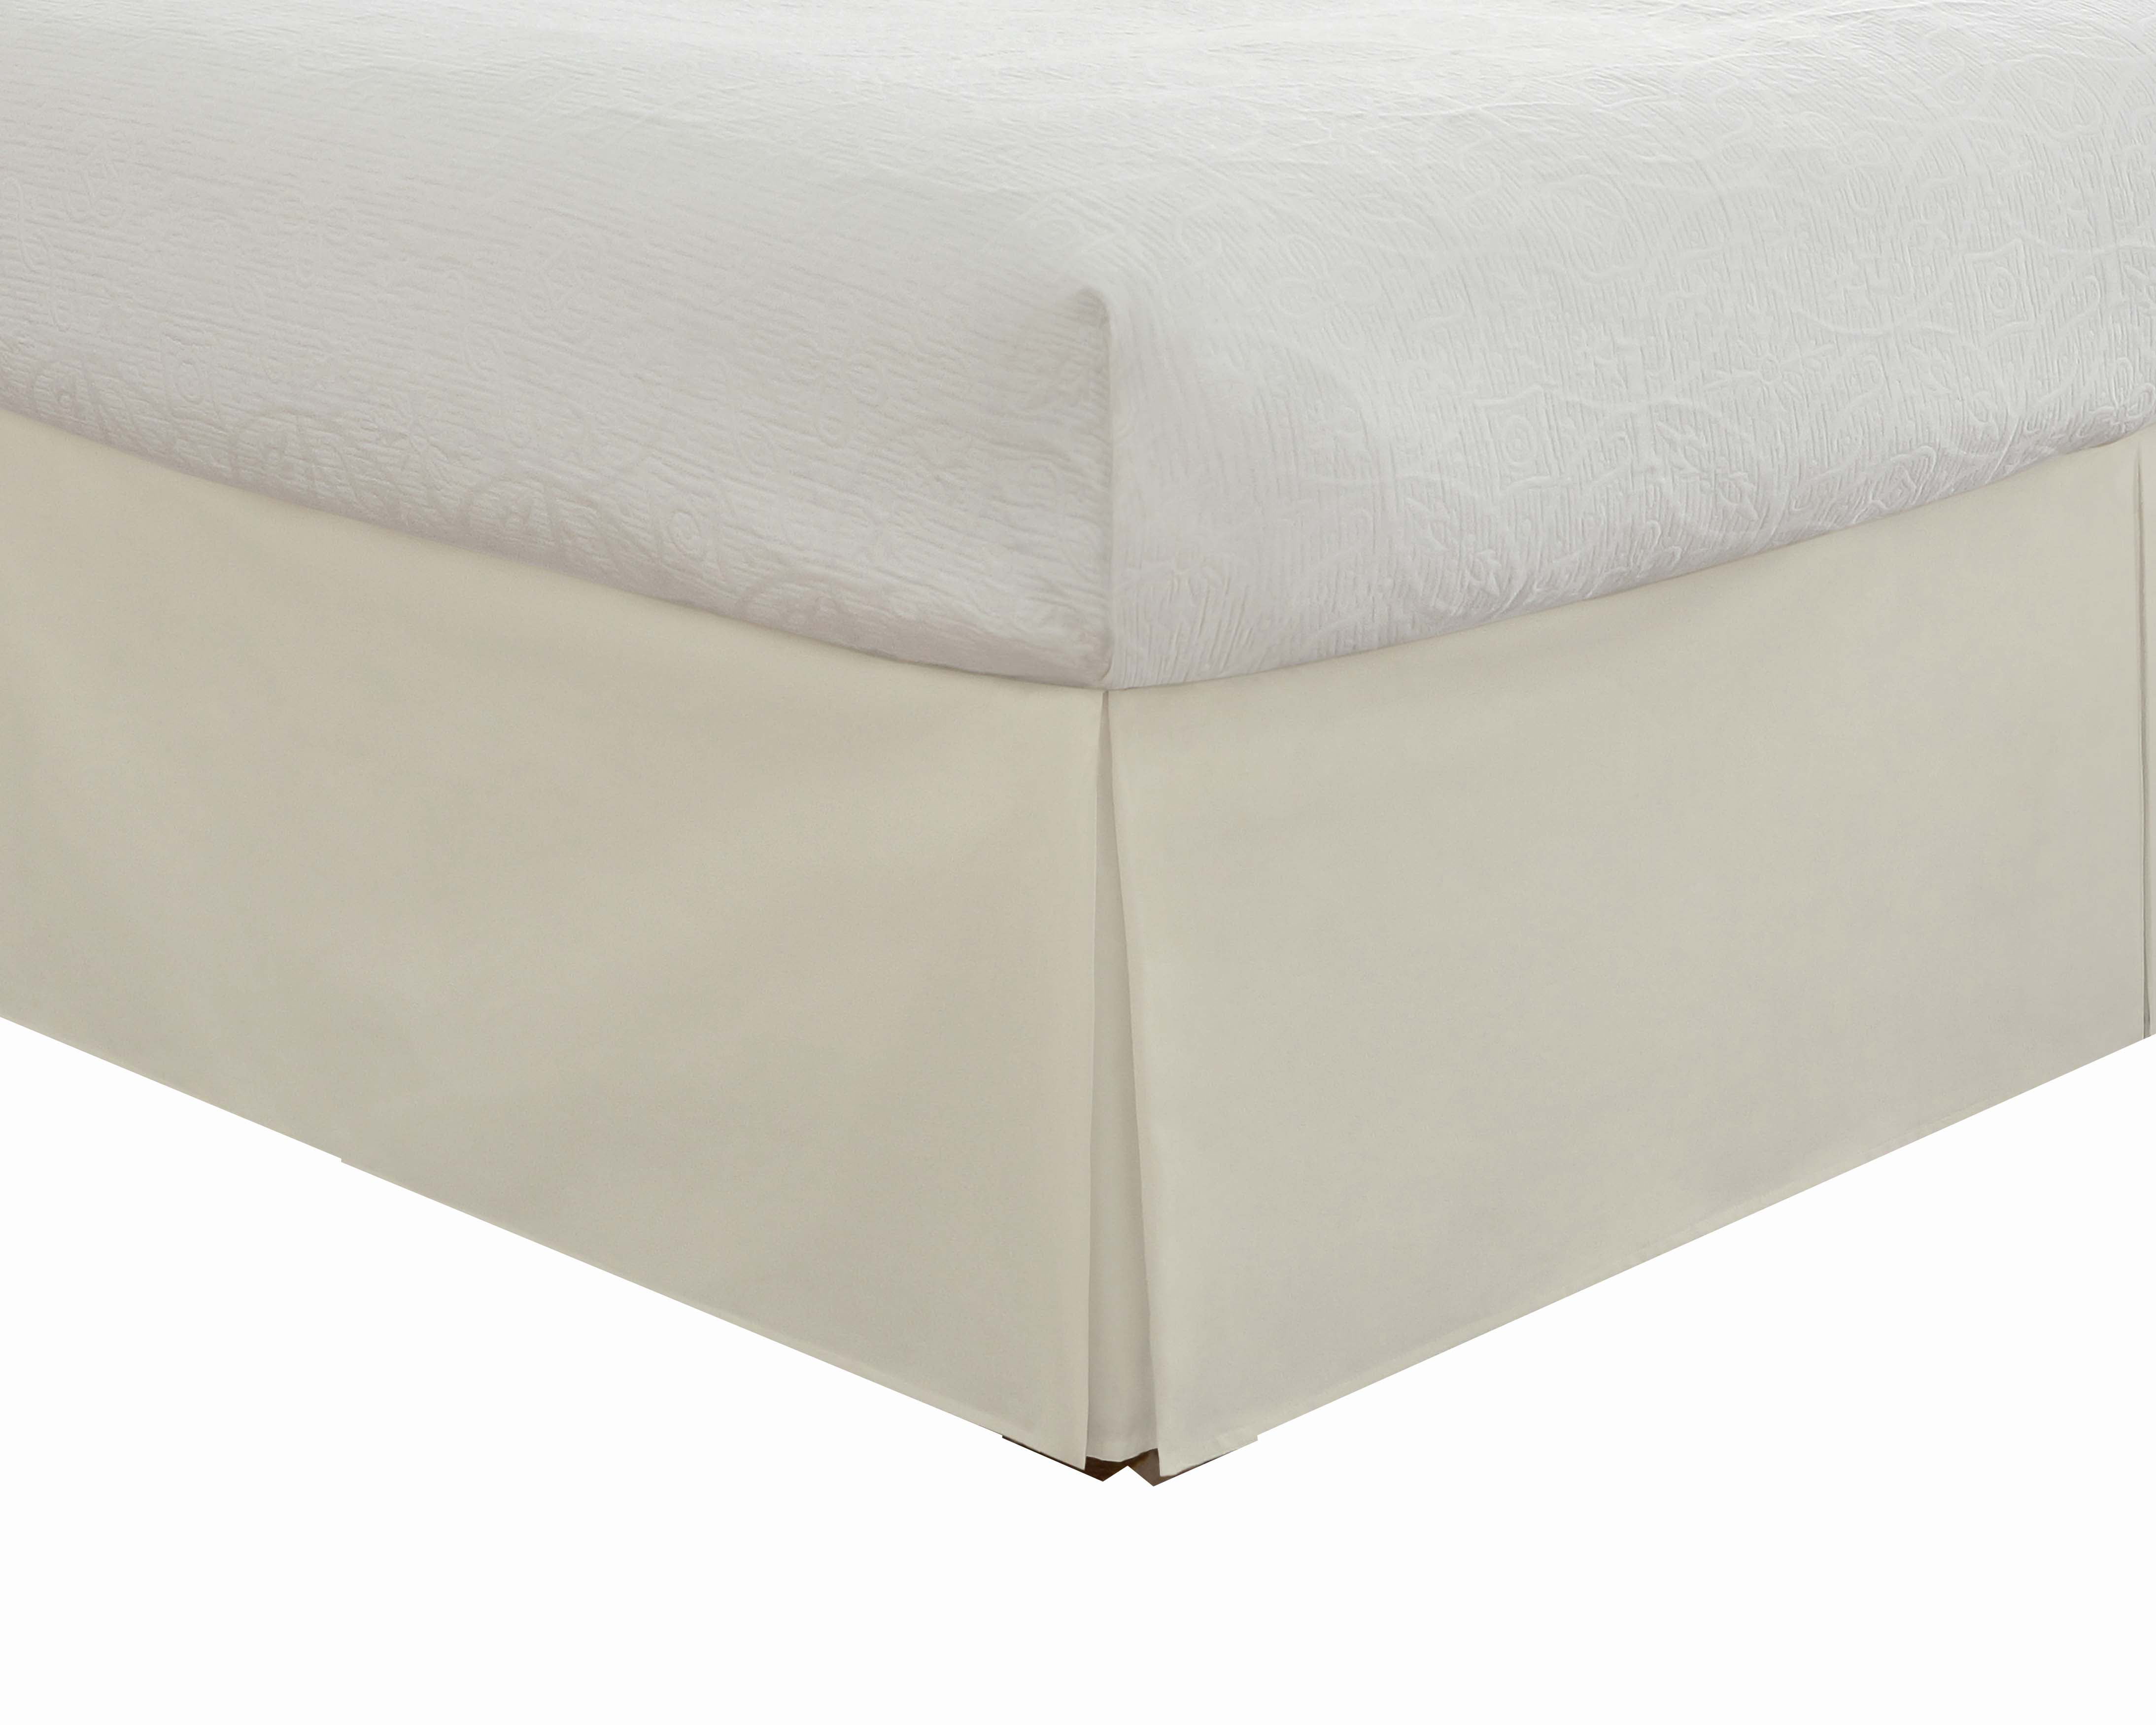 Bed for sale online Todays Home Toh24914whit06 Levinsohn Basic Cotton Rich 200tc Tailored 14 In 